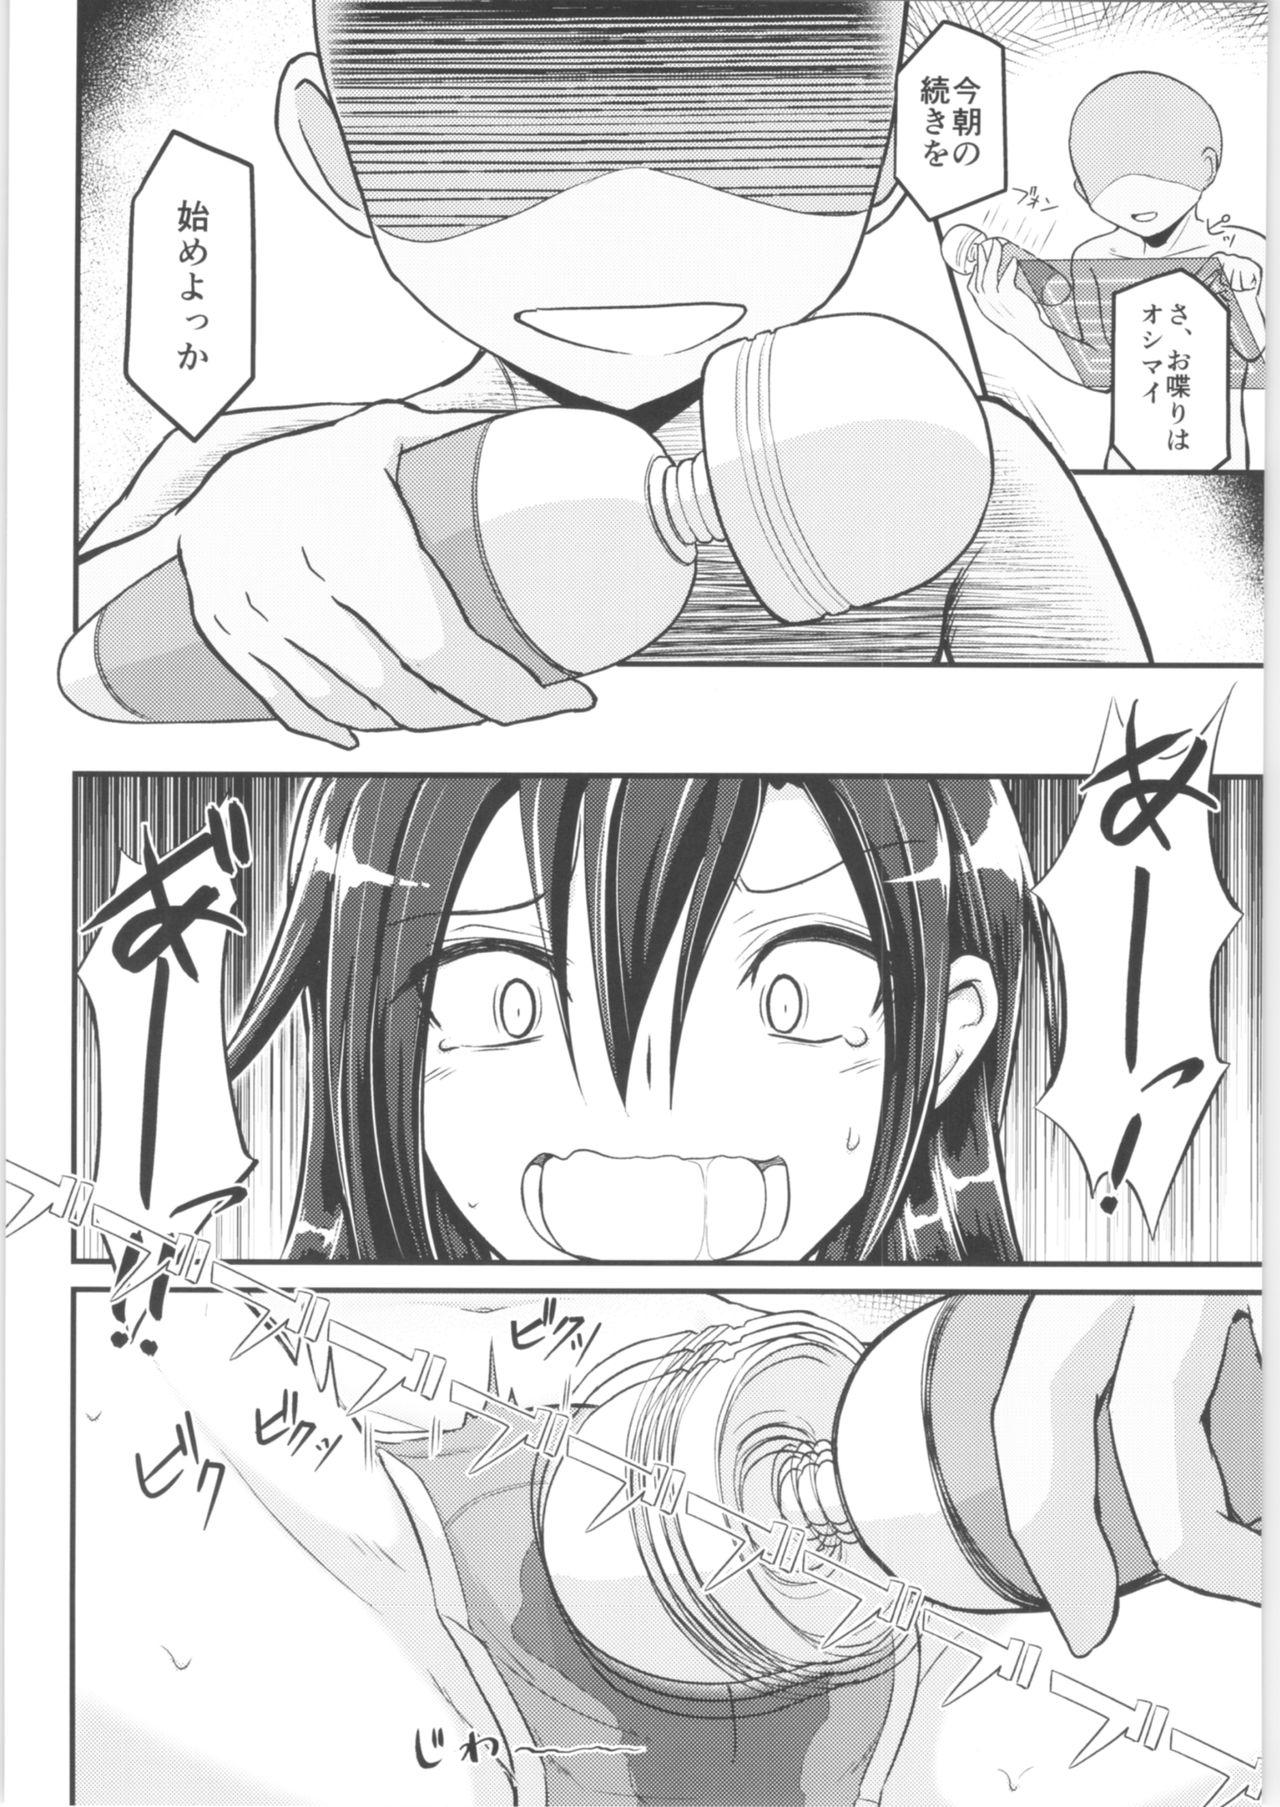 Home Another 01 - Sword art online Girl Girl - Page 9